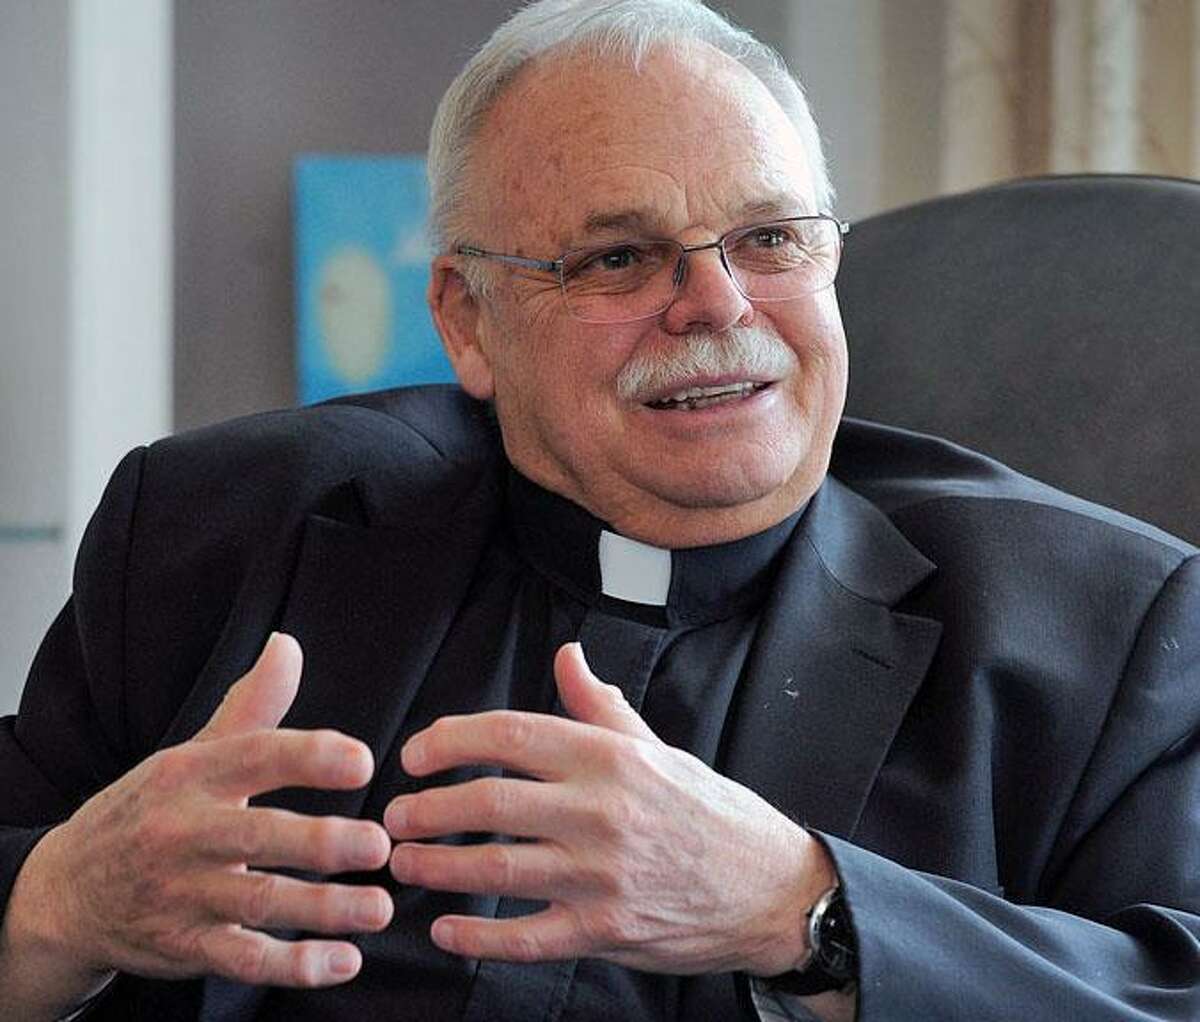 Monsignor Robert Weiss, pastor of St. Rose of Lima Church in Newtown